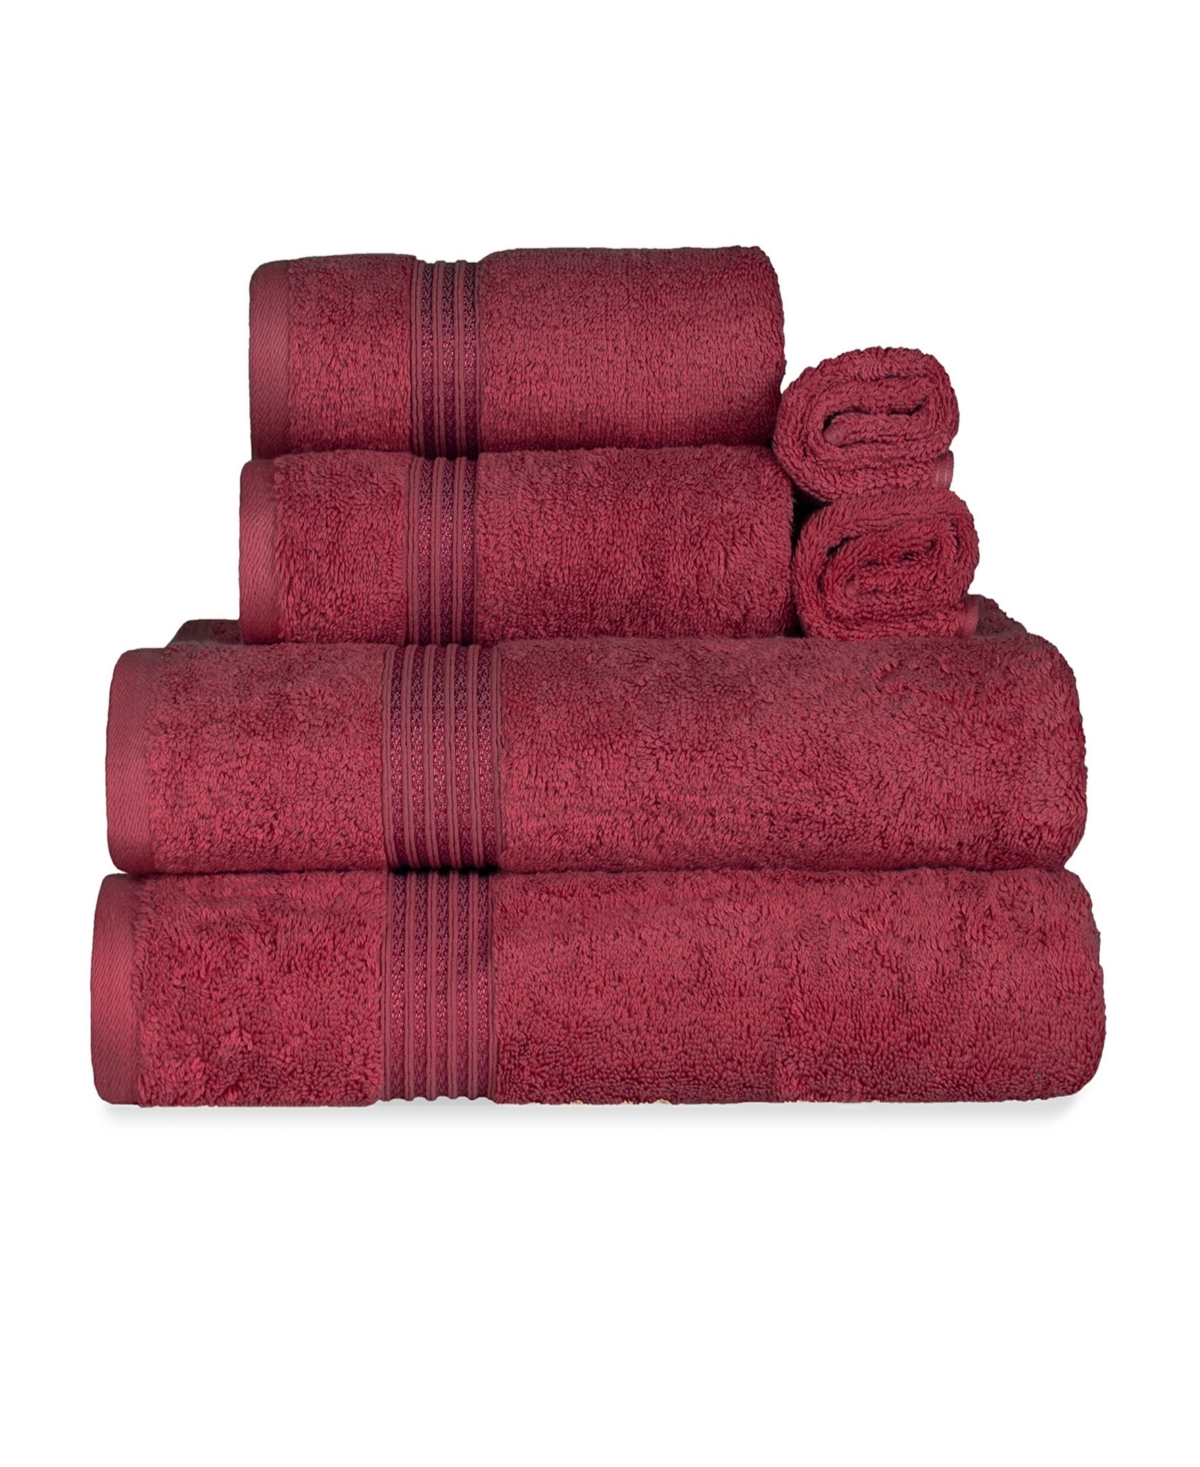 Superior Solid Quick Drying Absorbent 6 Piece Egyptian Cotton Assorted Towel Set Bedding In Burgundy